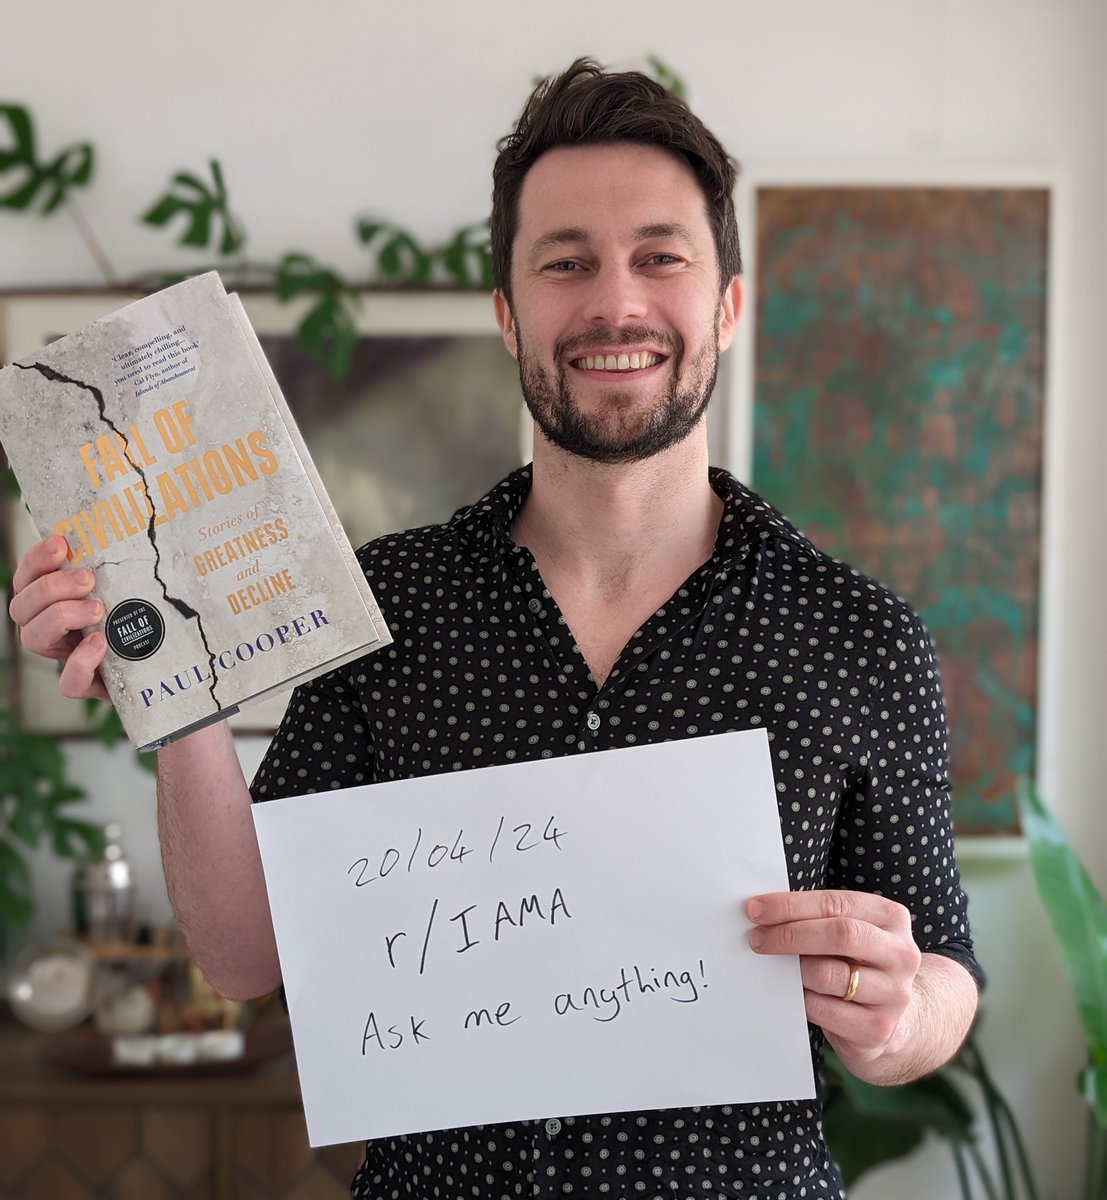 Going live now, here: reddit.com/r/IAmA/comment… Come AMA!